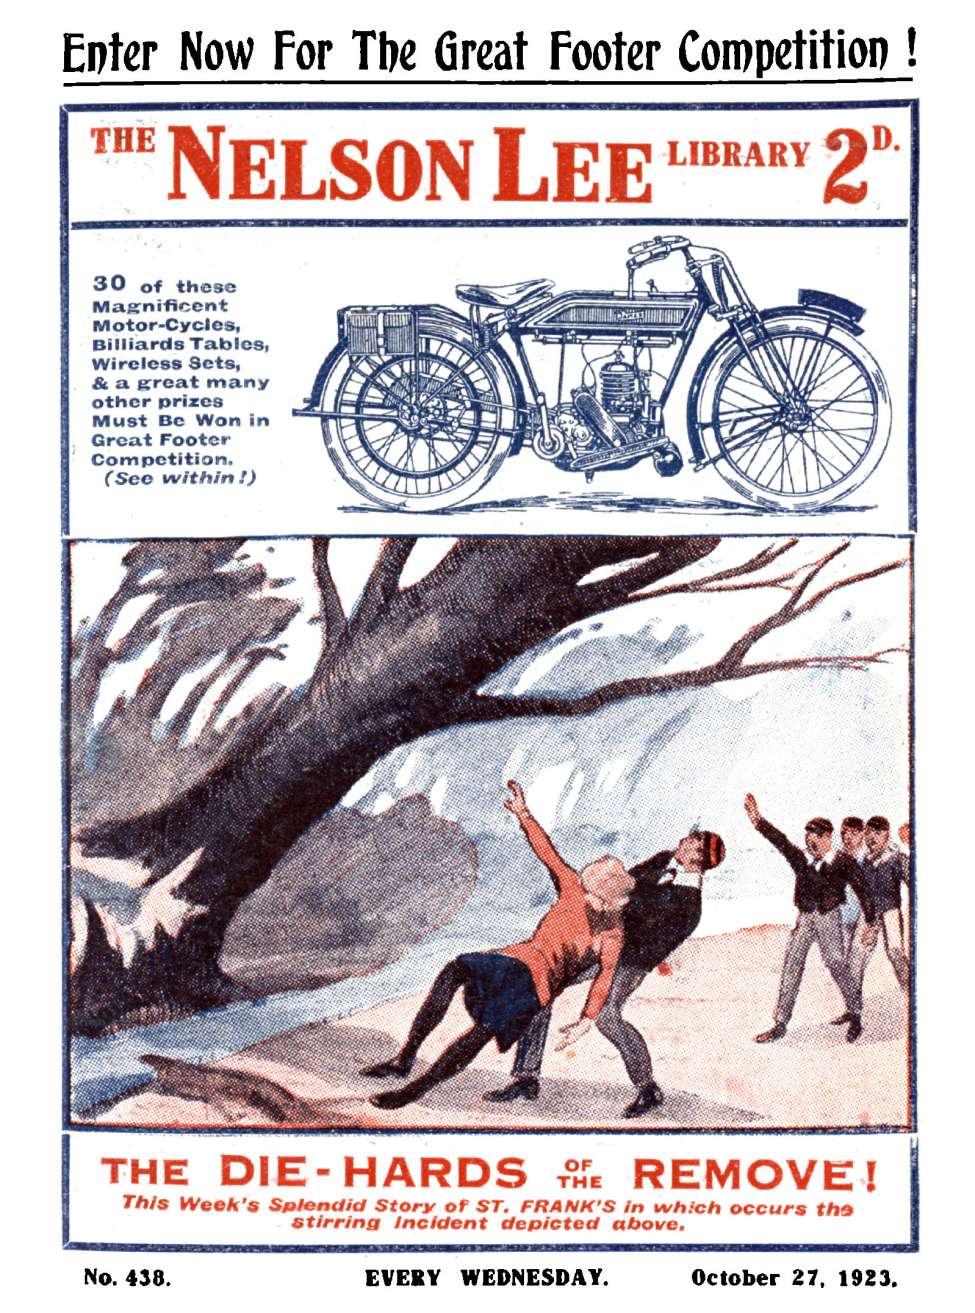 Book Cover For Nelson Lee Library s1 438 - The Die-hards of the Remove